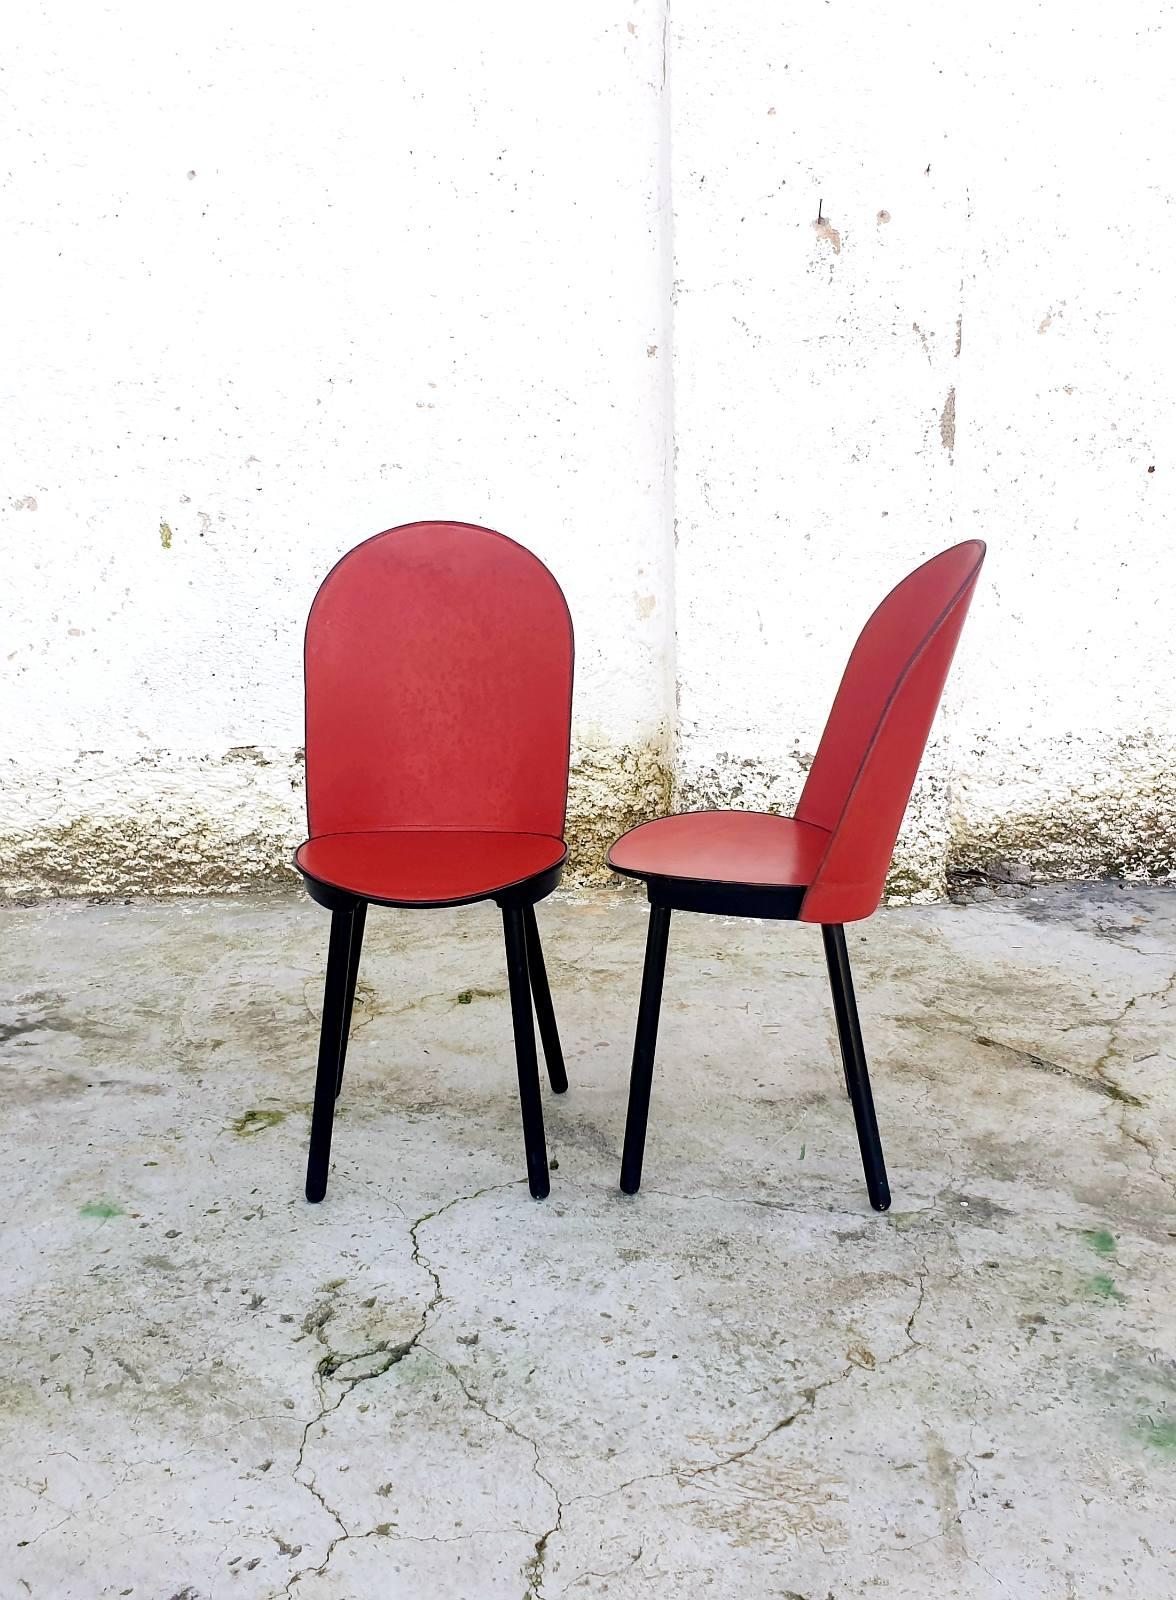 Italian Mid Century Red Leather Dining Chairs, Zanotta, Italy 80s, Pair For Sale